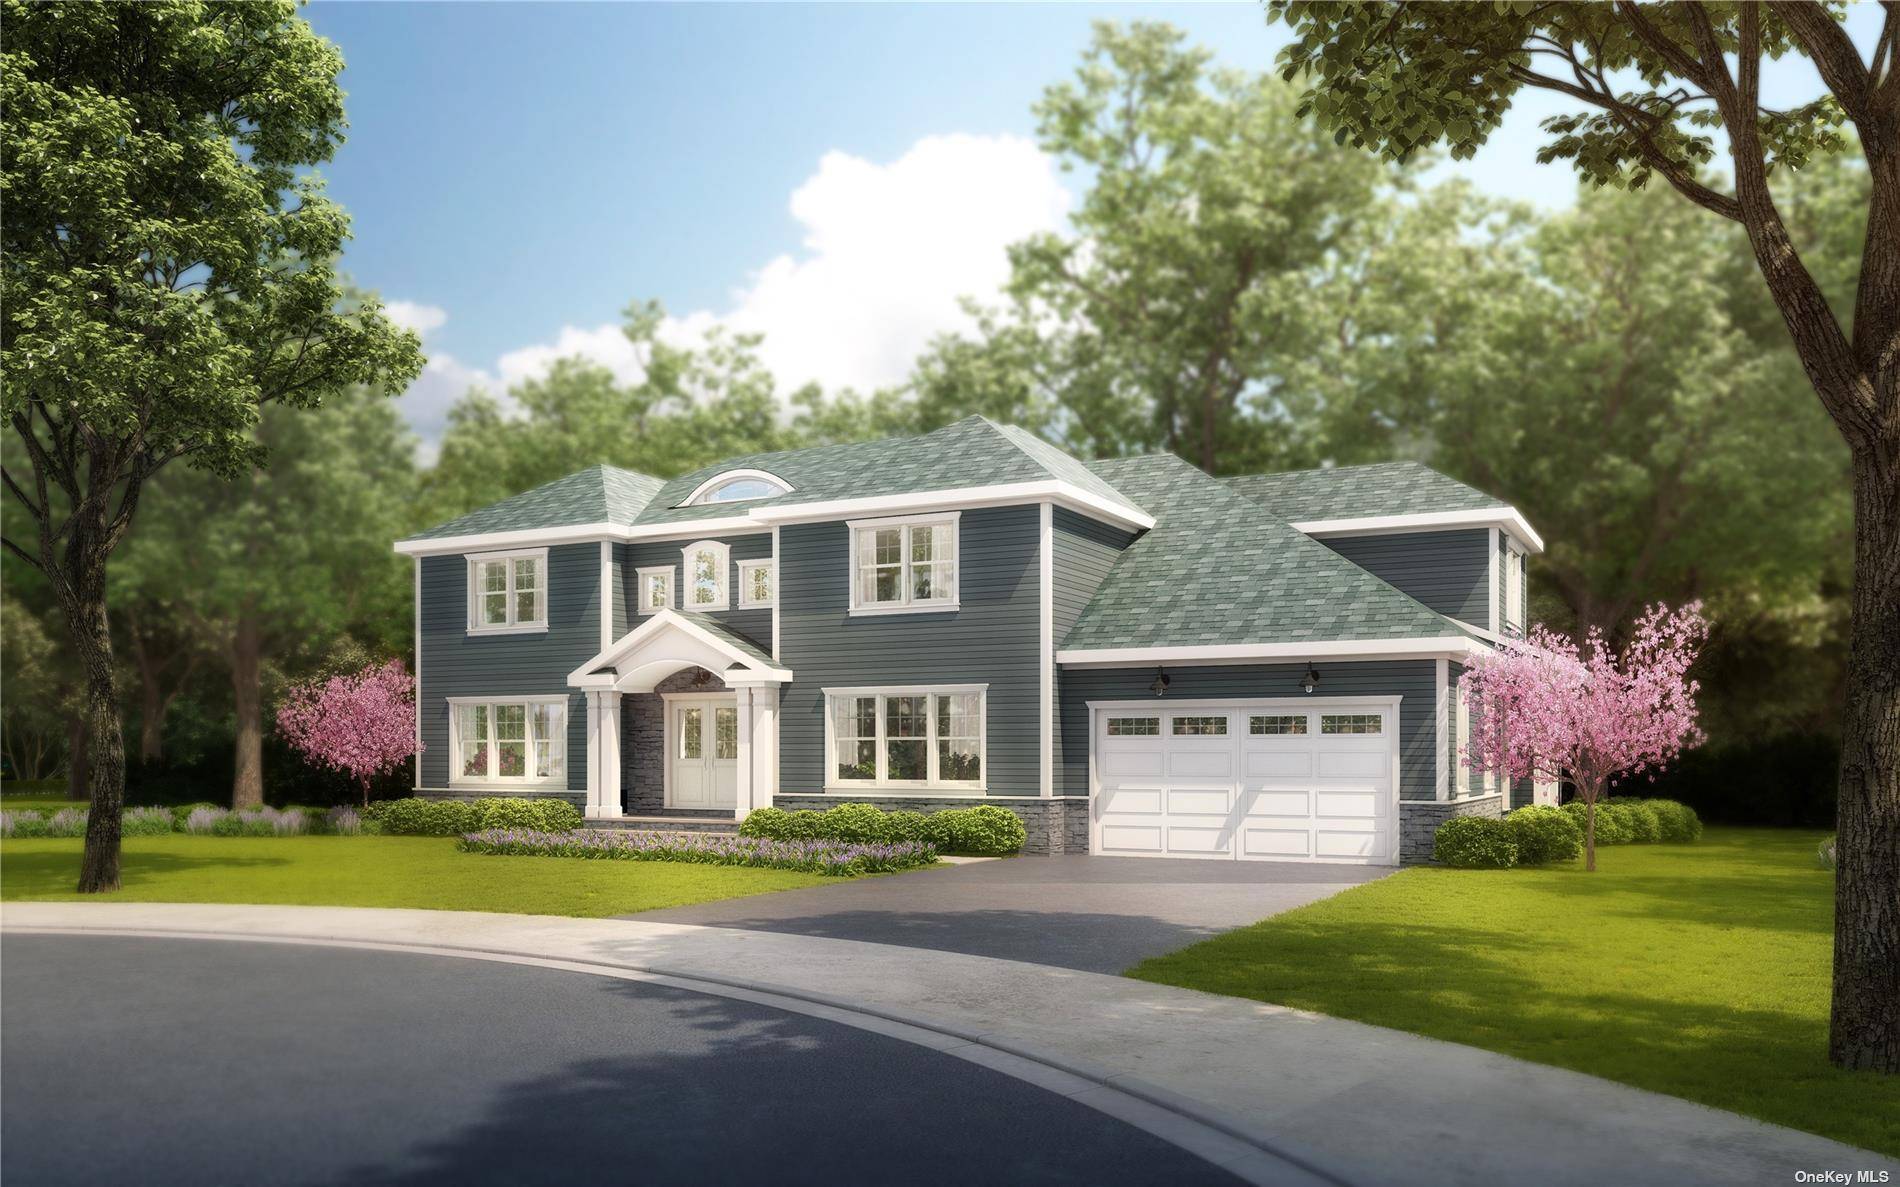 Welcome to Mimosa Estates at Gatehouse Court the land which once held one of Long Island's greatest estates now holds this spectacular 1 of 4 brand new custom built homes ...